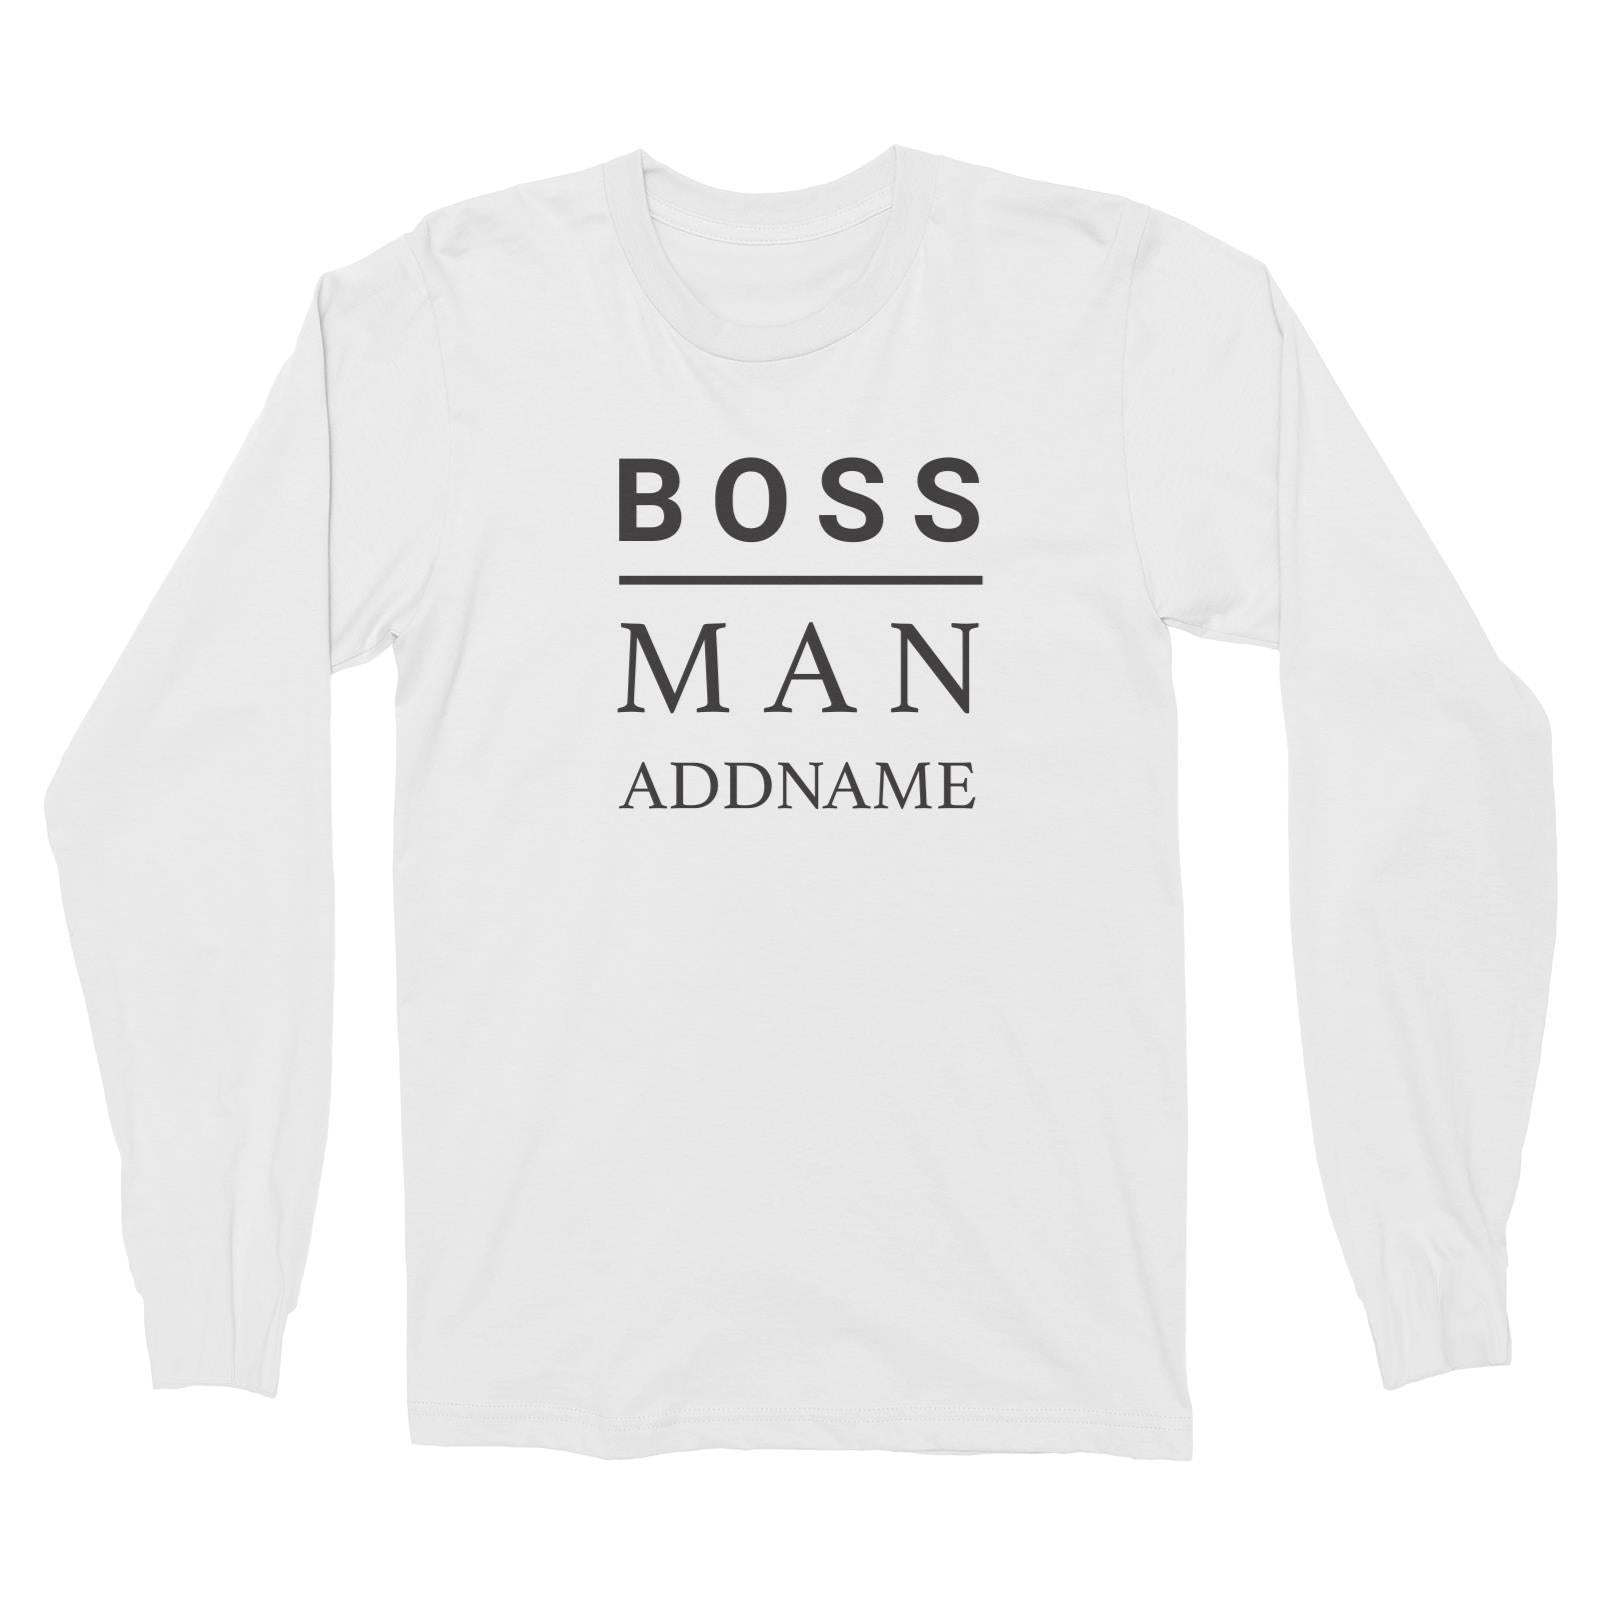 Boss Man Addname Long Sleeve Unisex T-Shirt  Matching Family Personalizable Designs